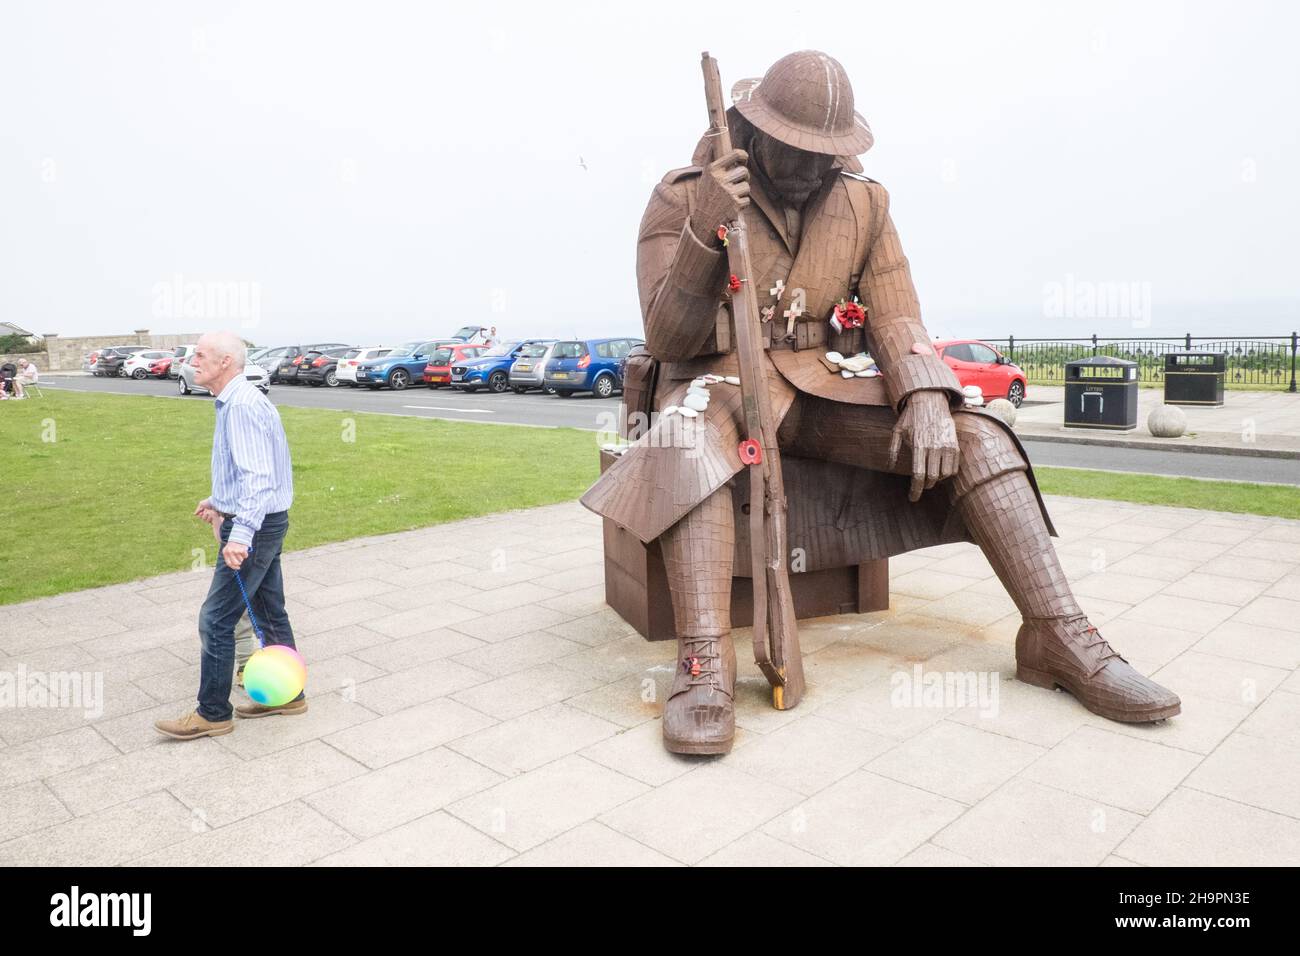 Huge,big,statue,of,soldier,Tommy, World War One, Soldier Sculpture, Eleven 'O' One,tribute,to,fallen,soldiers,at,Seaham,town,centre,at,Seaham,Seaham Beach,a,popular,location,for,this,hobby,pastime,jewellery,makers,craft,design,Durham,Coast,Durham Coast Path,Durham Coast,coastline,County Durham,North,North East,England,English,Britain,British,UK,GB,Great Britain,Europe,European,UK,United Kingdom Stock Photo